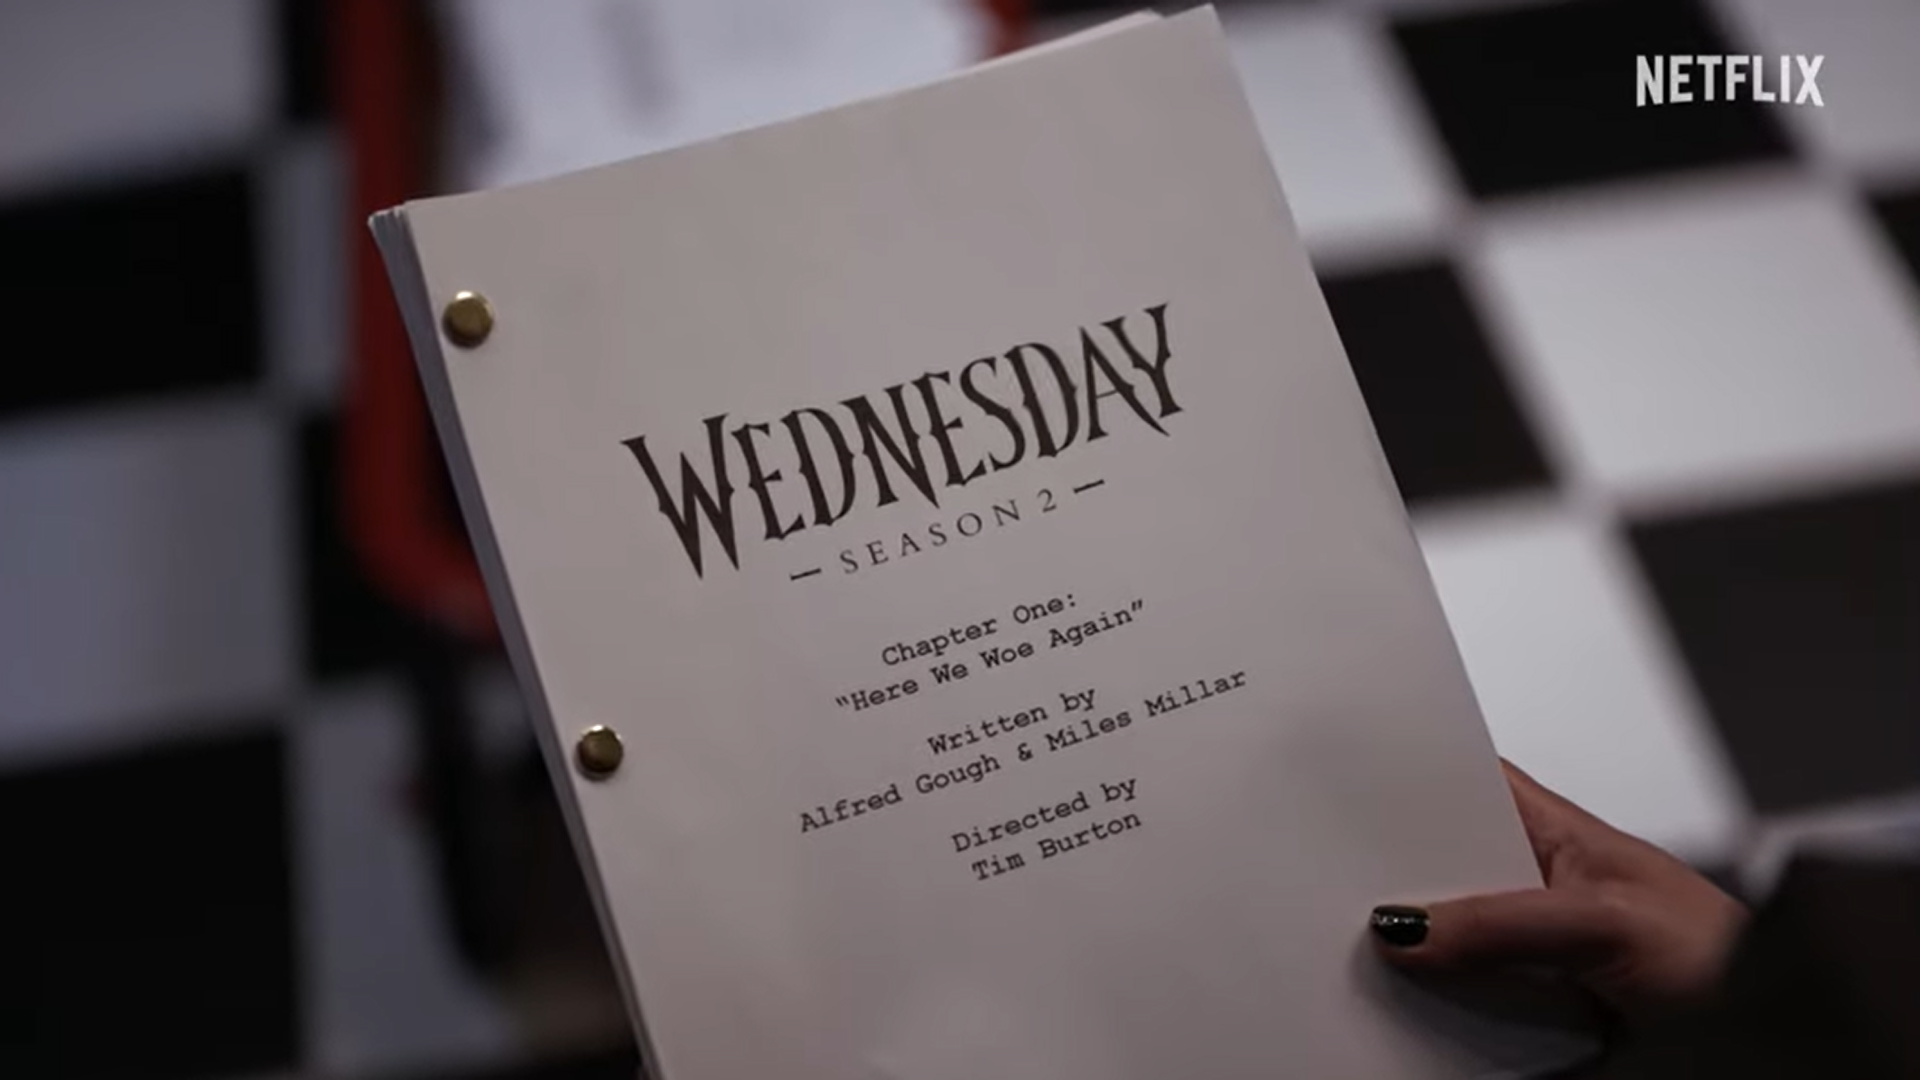 Billie Piper, Evie Templeton, Owen Painter, And Noah Taylor Added to Netflix's 'Wednesday' Second Season Cast With A New Teaser Released